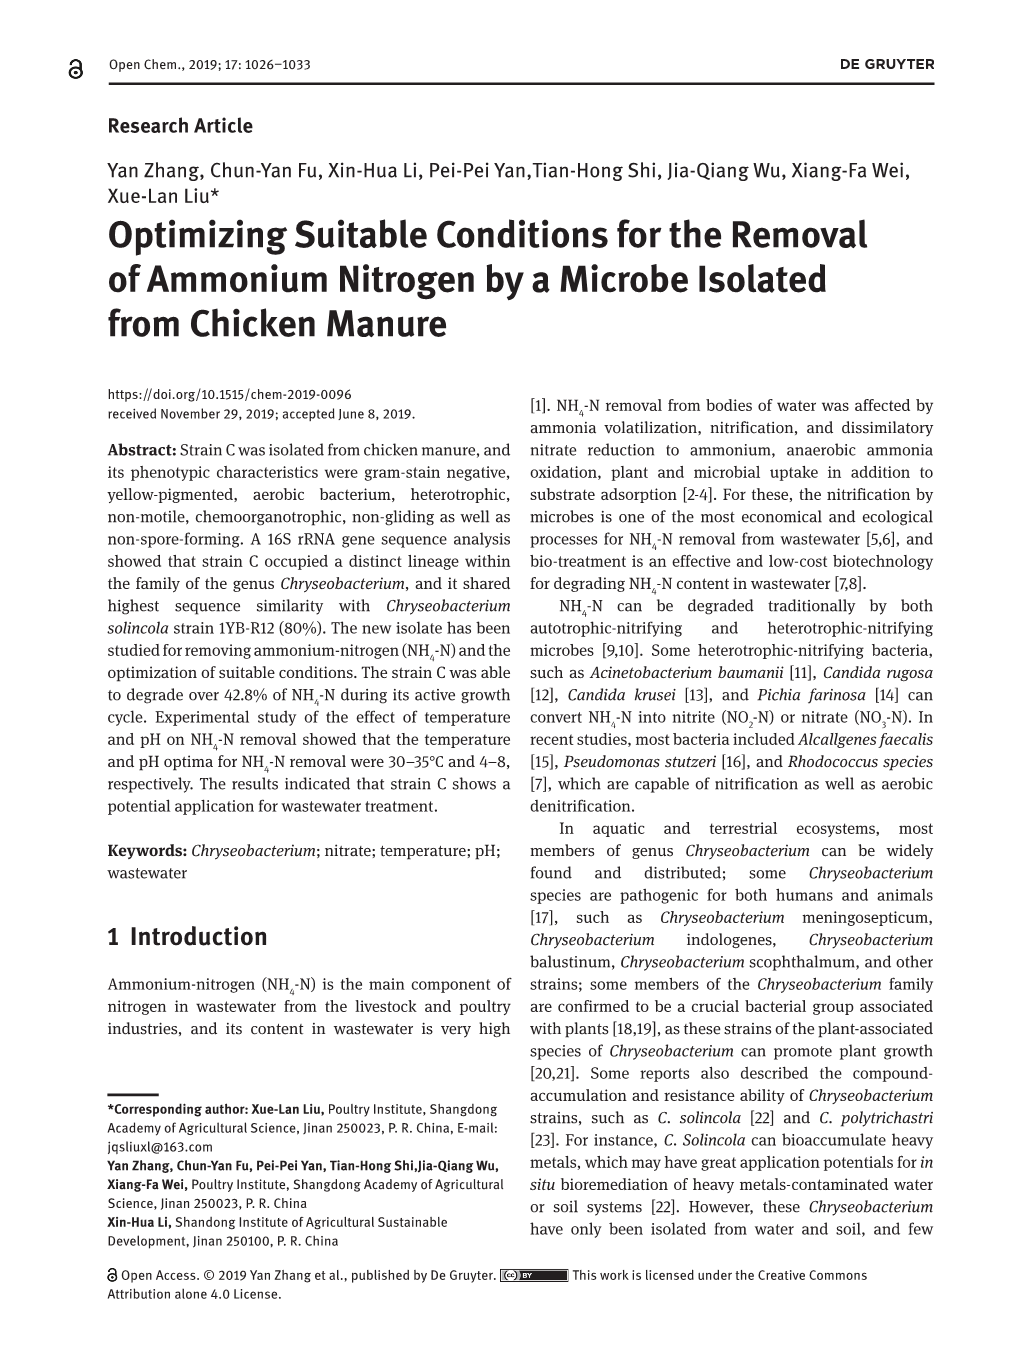 Optimizing Suitable Conditions for the Removal of Ammonium Nitrogen by a Microbe Isolated from Chicken Manure [1]